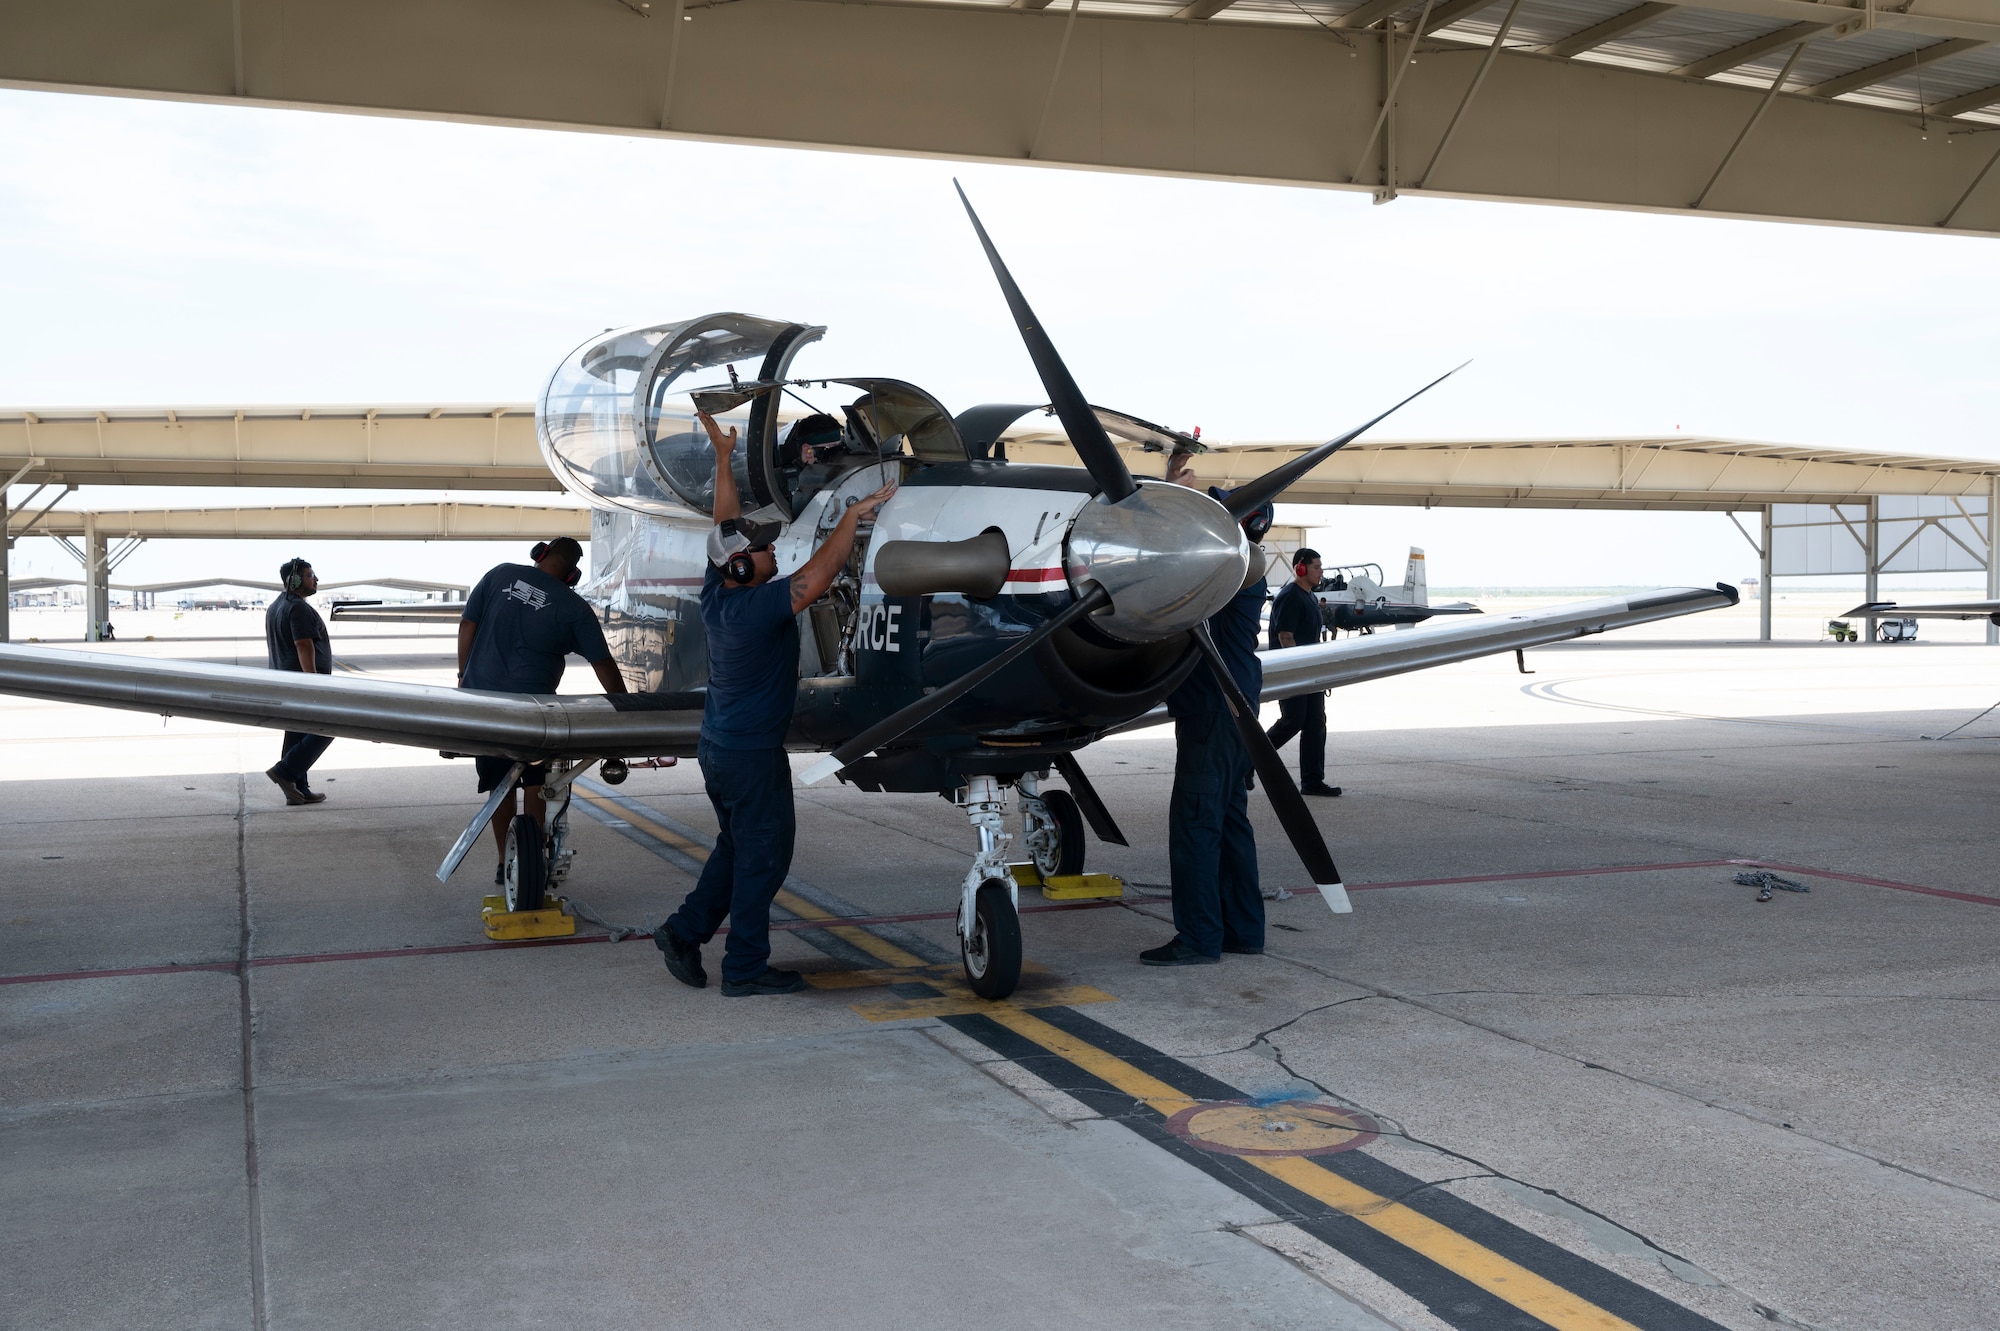 47th Maintenance Directorate aircraft attendants prepare a T-6A Texan II for inspection on the flight line at Laughlin Air Force Base, Texas, Sept. 11, 2023. In honor of Hispanic Heritage Month, these MXD workers were highlighted for their impact on Laughlin’s mission of producing the world’s best pilots. (U.S. Air Force photo by Airman 1st Class Kailee Reynolds)